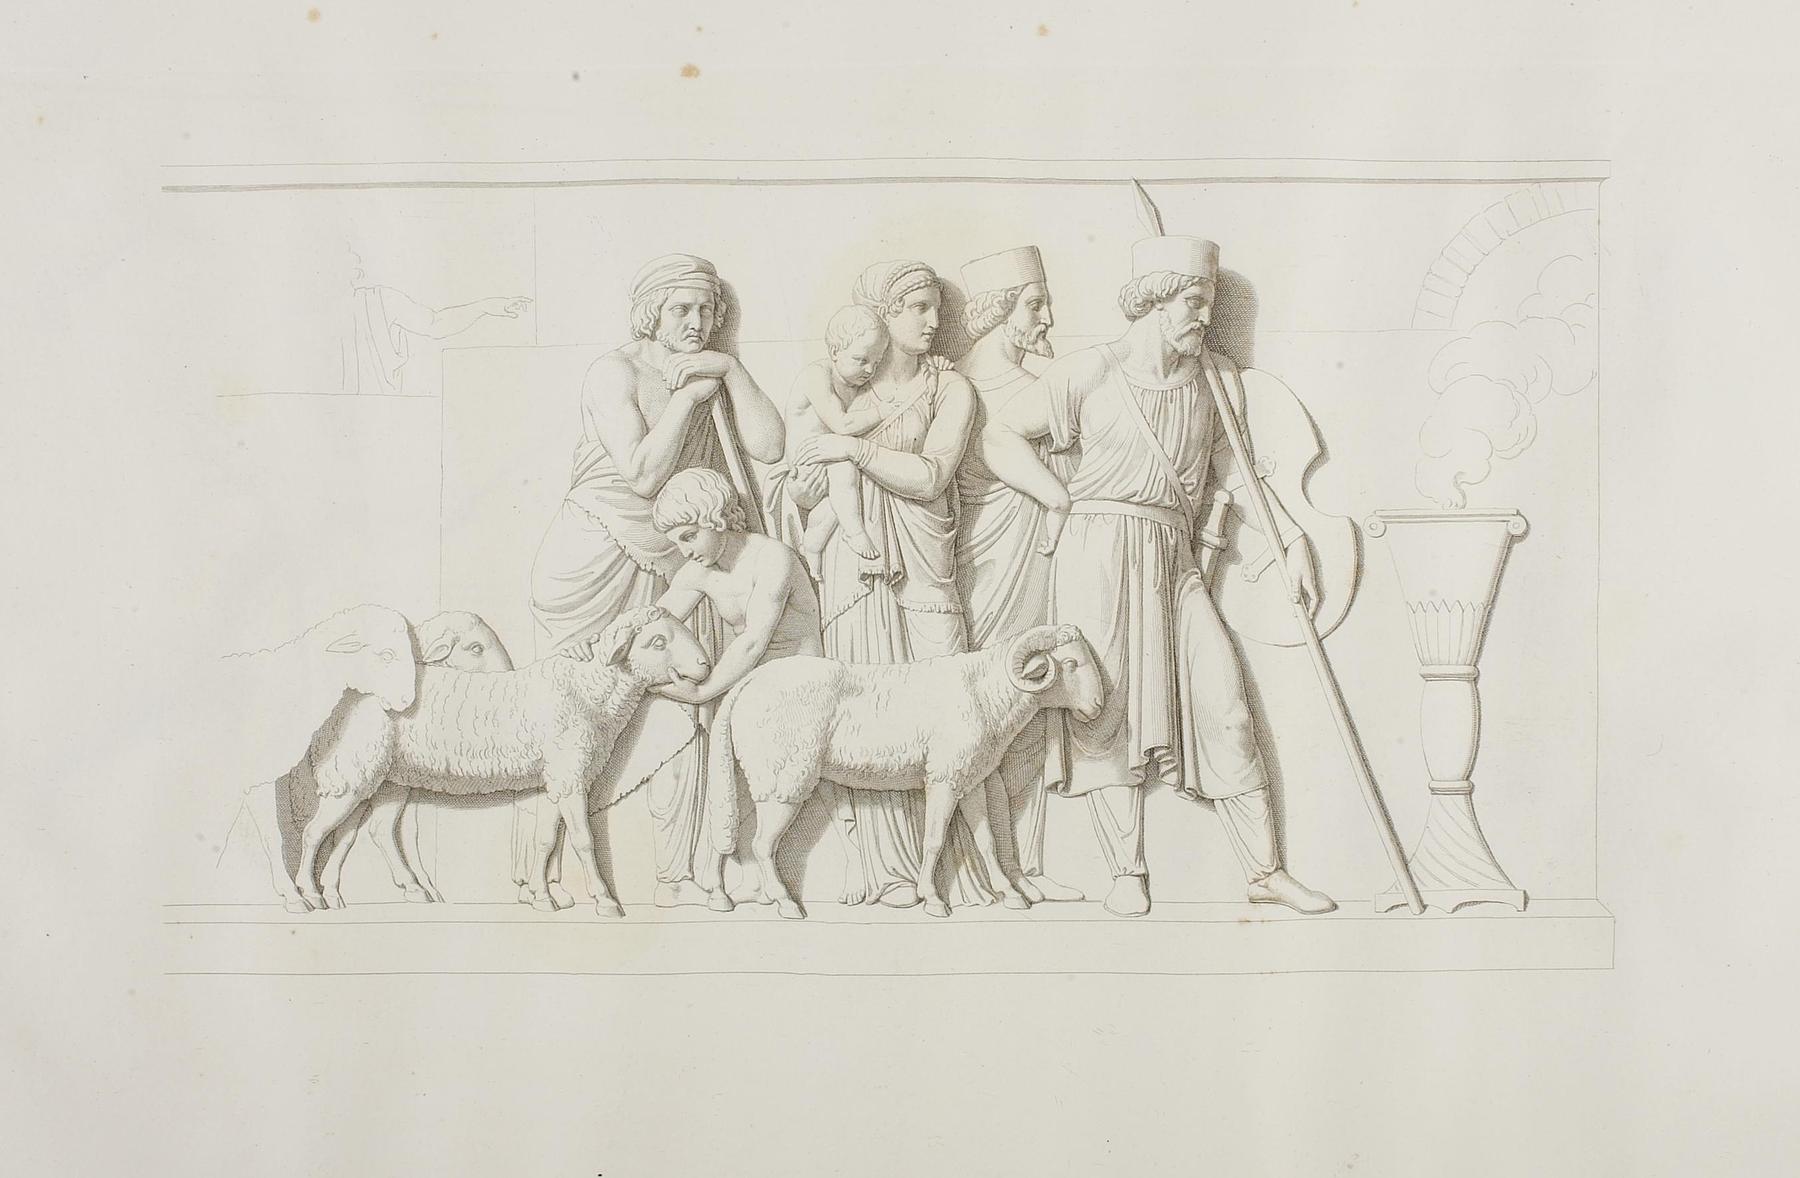 Warriors on their Guard and a Shepherd Family by the Town Gate, E33,14